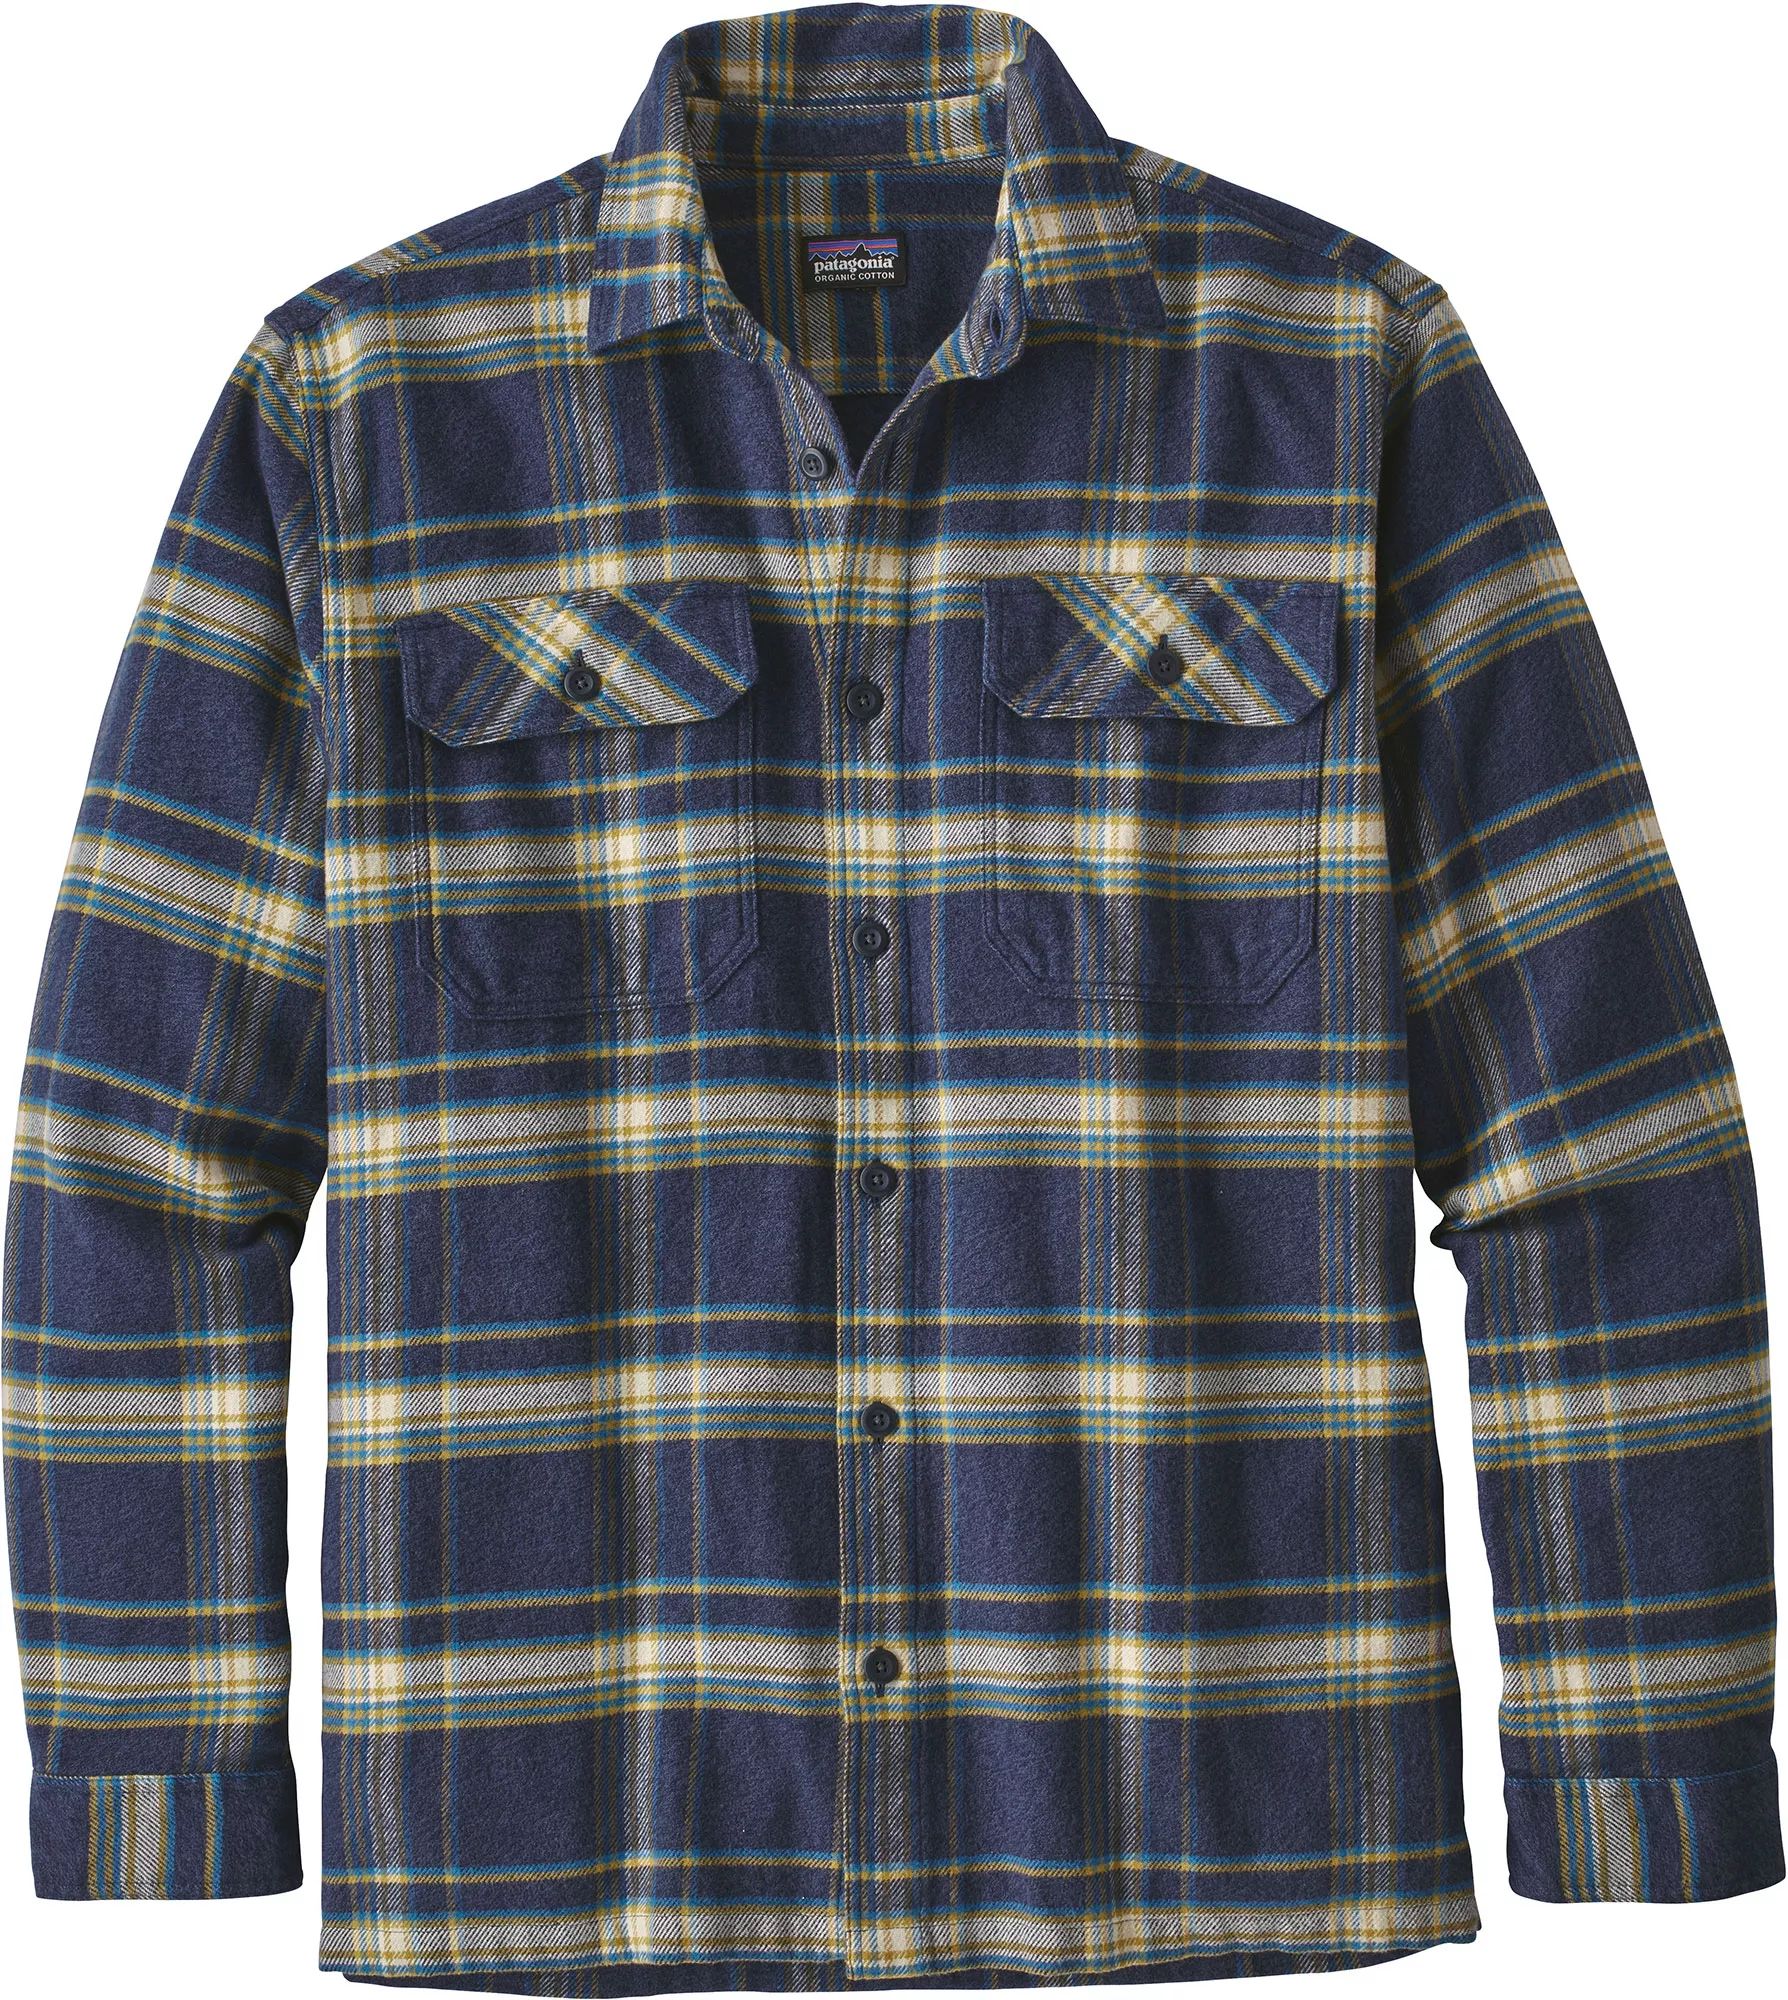 Patagonia Men's Fjord Flannel Button Up Long Sleeve Shirt, XXL, Activist/Navy Blue | Dick's Sporting Goods